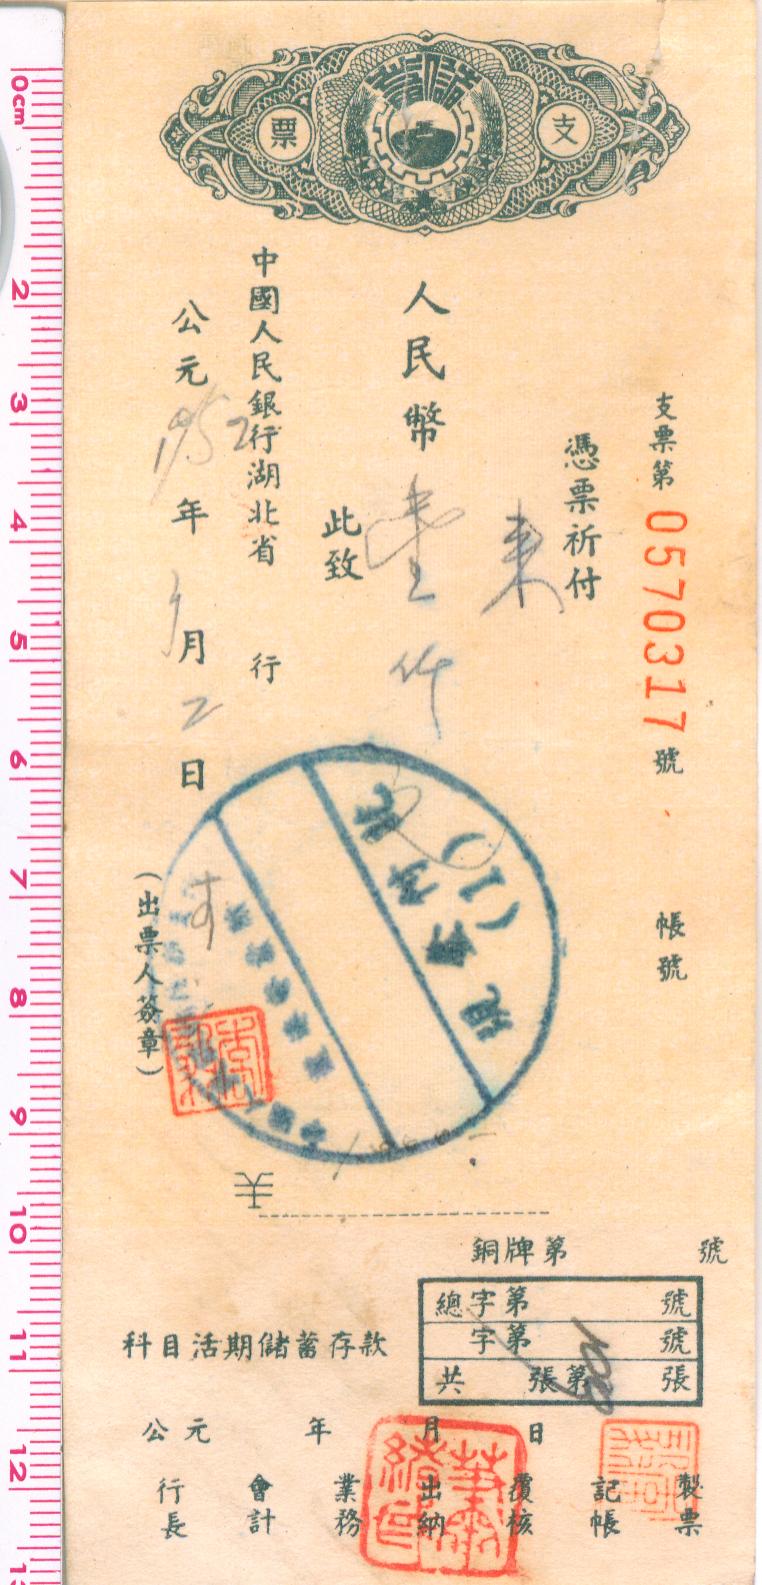 D1102, People's Bank of China, Check Cheque of 1952, Hubei Branch